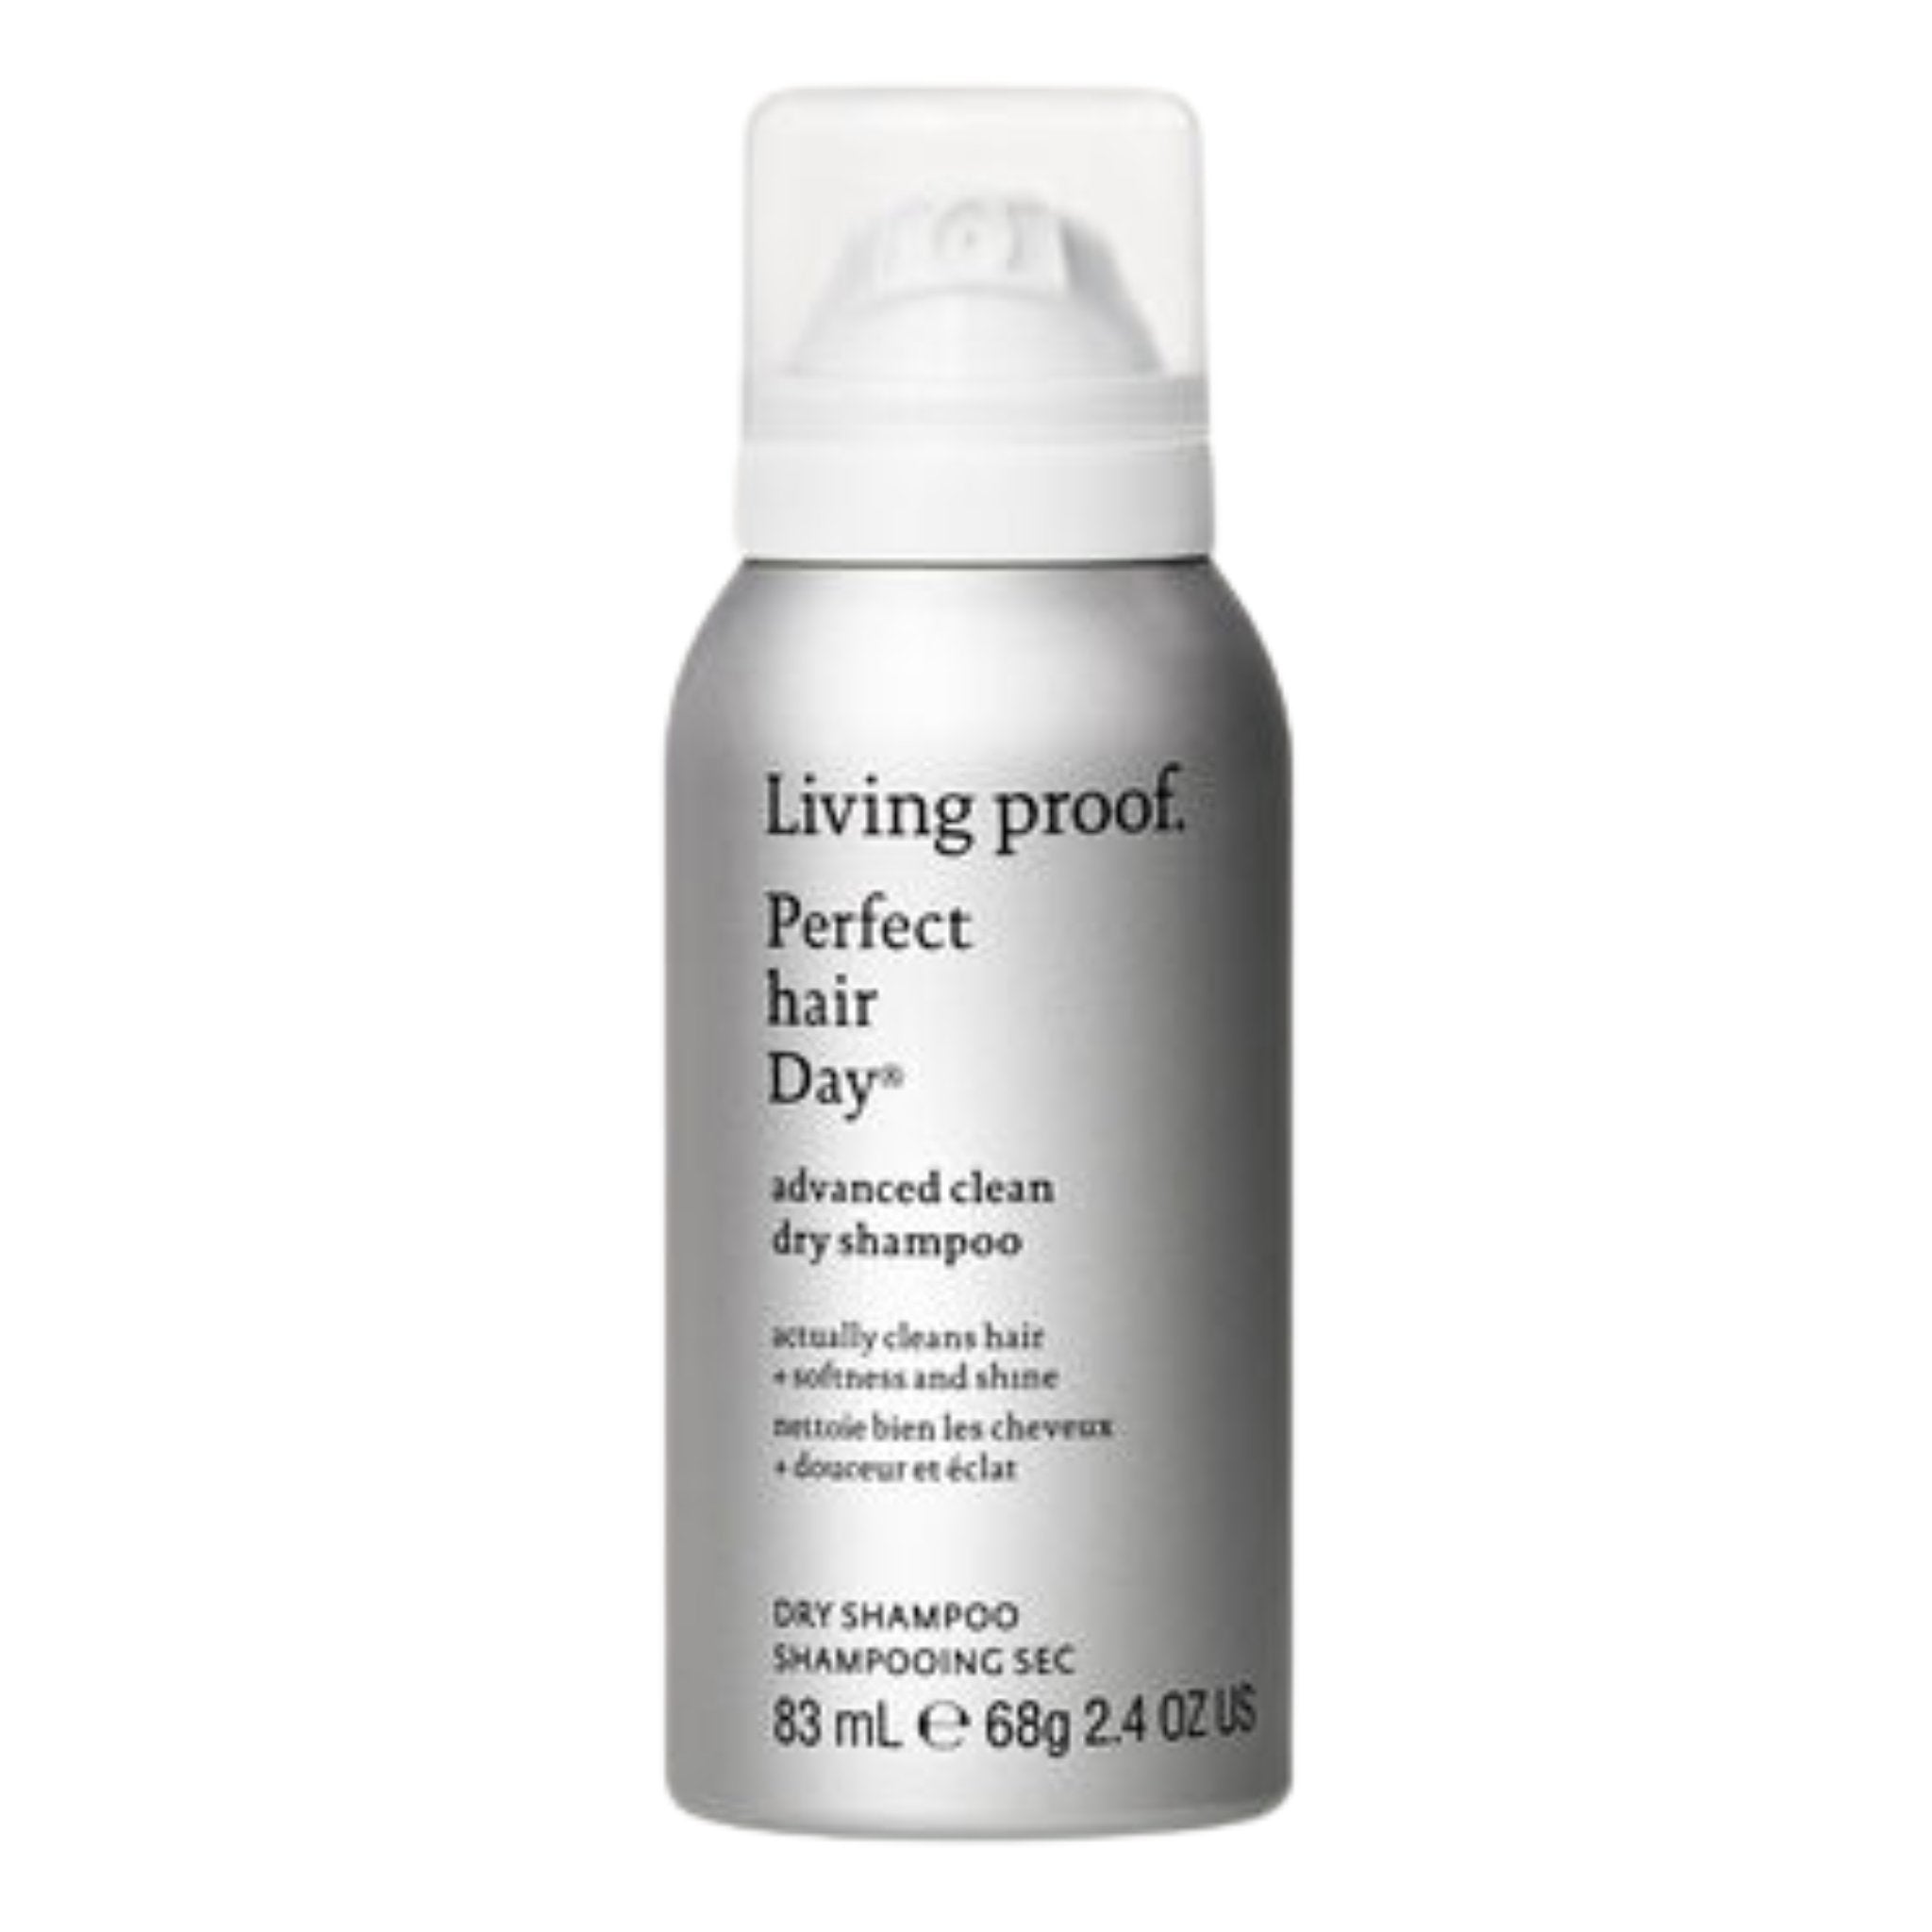 Living Proof. Shampoing Sec Advanced Perfect Hair Day - 83 ml - Concept C. Shop